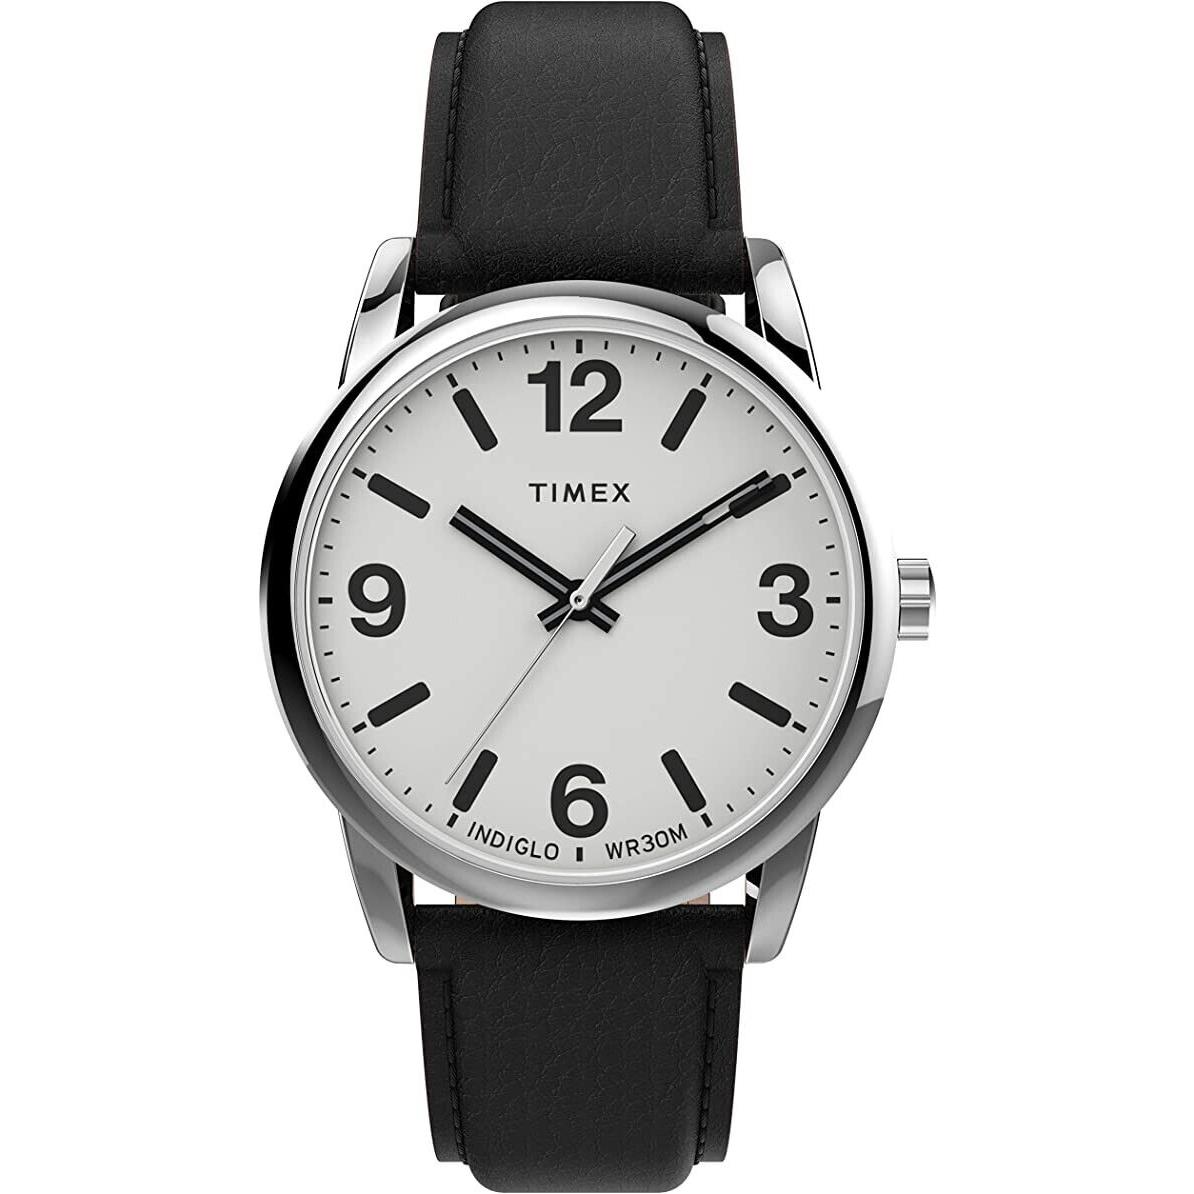 Timex Easy Reader Silver-tone Black Leather Men s Watch TW2U71700 - Dial: White, Band: Black